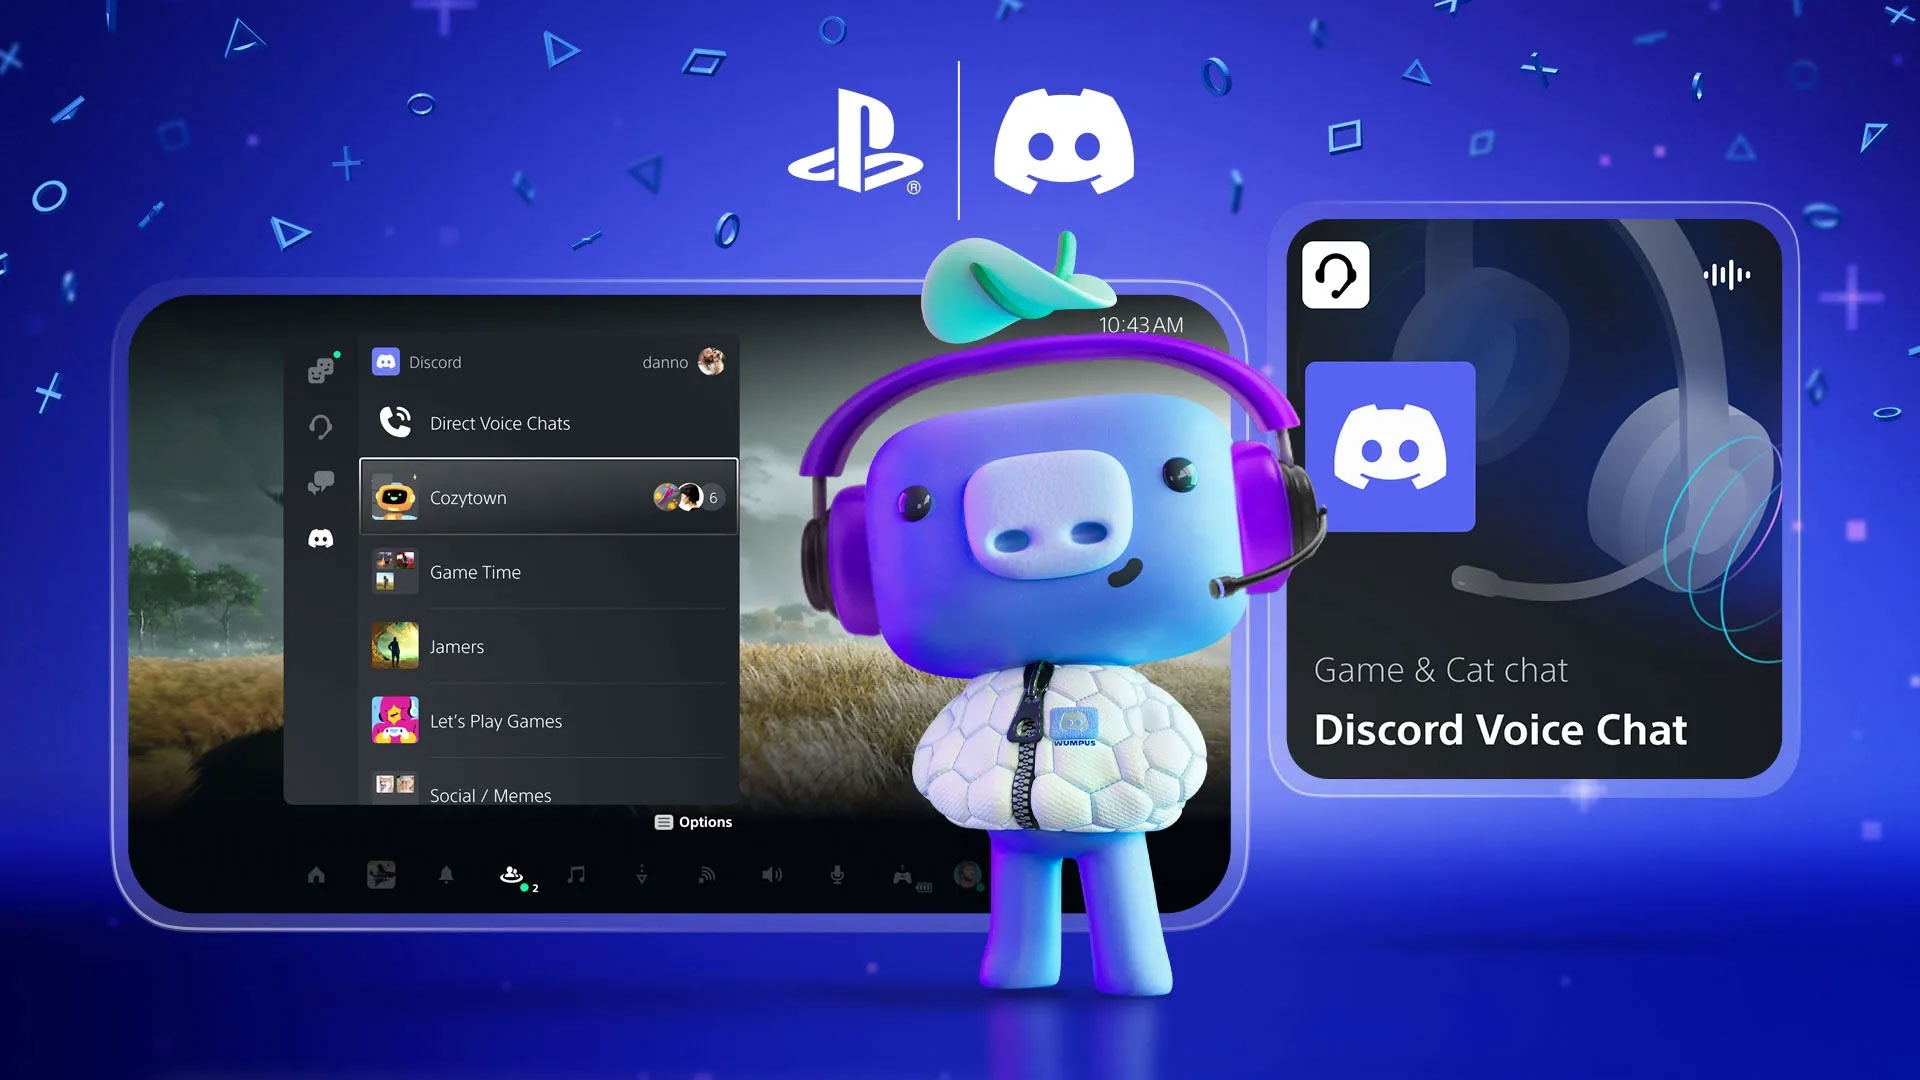 PlayStation 5 players will finally be able to join Discord voice chat directly from their console